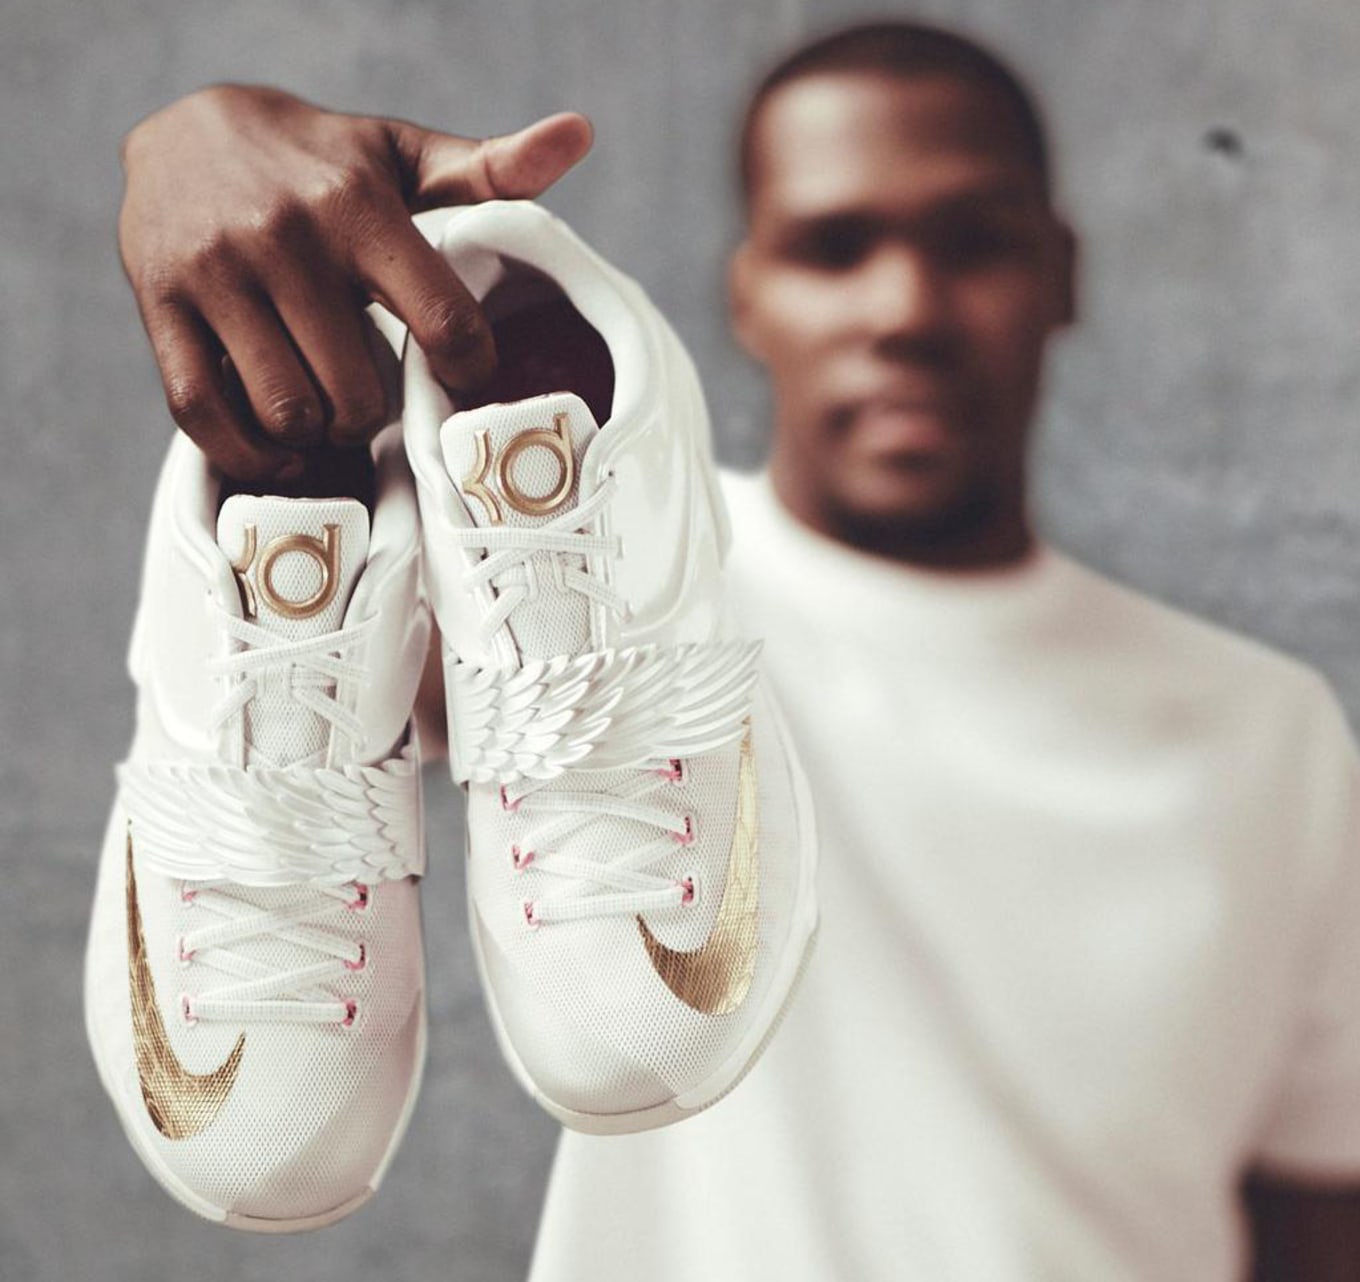 kevin durant aunt pearl shoes 2018